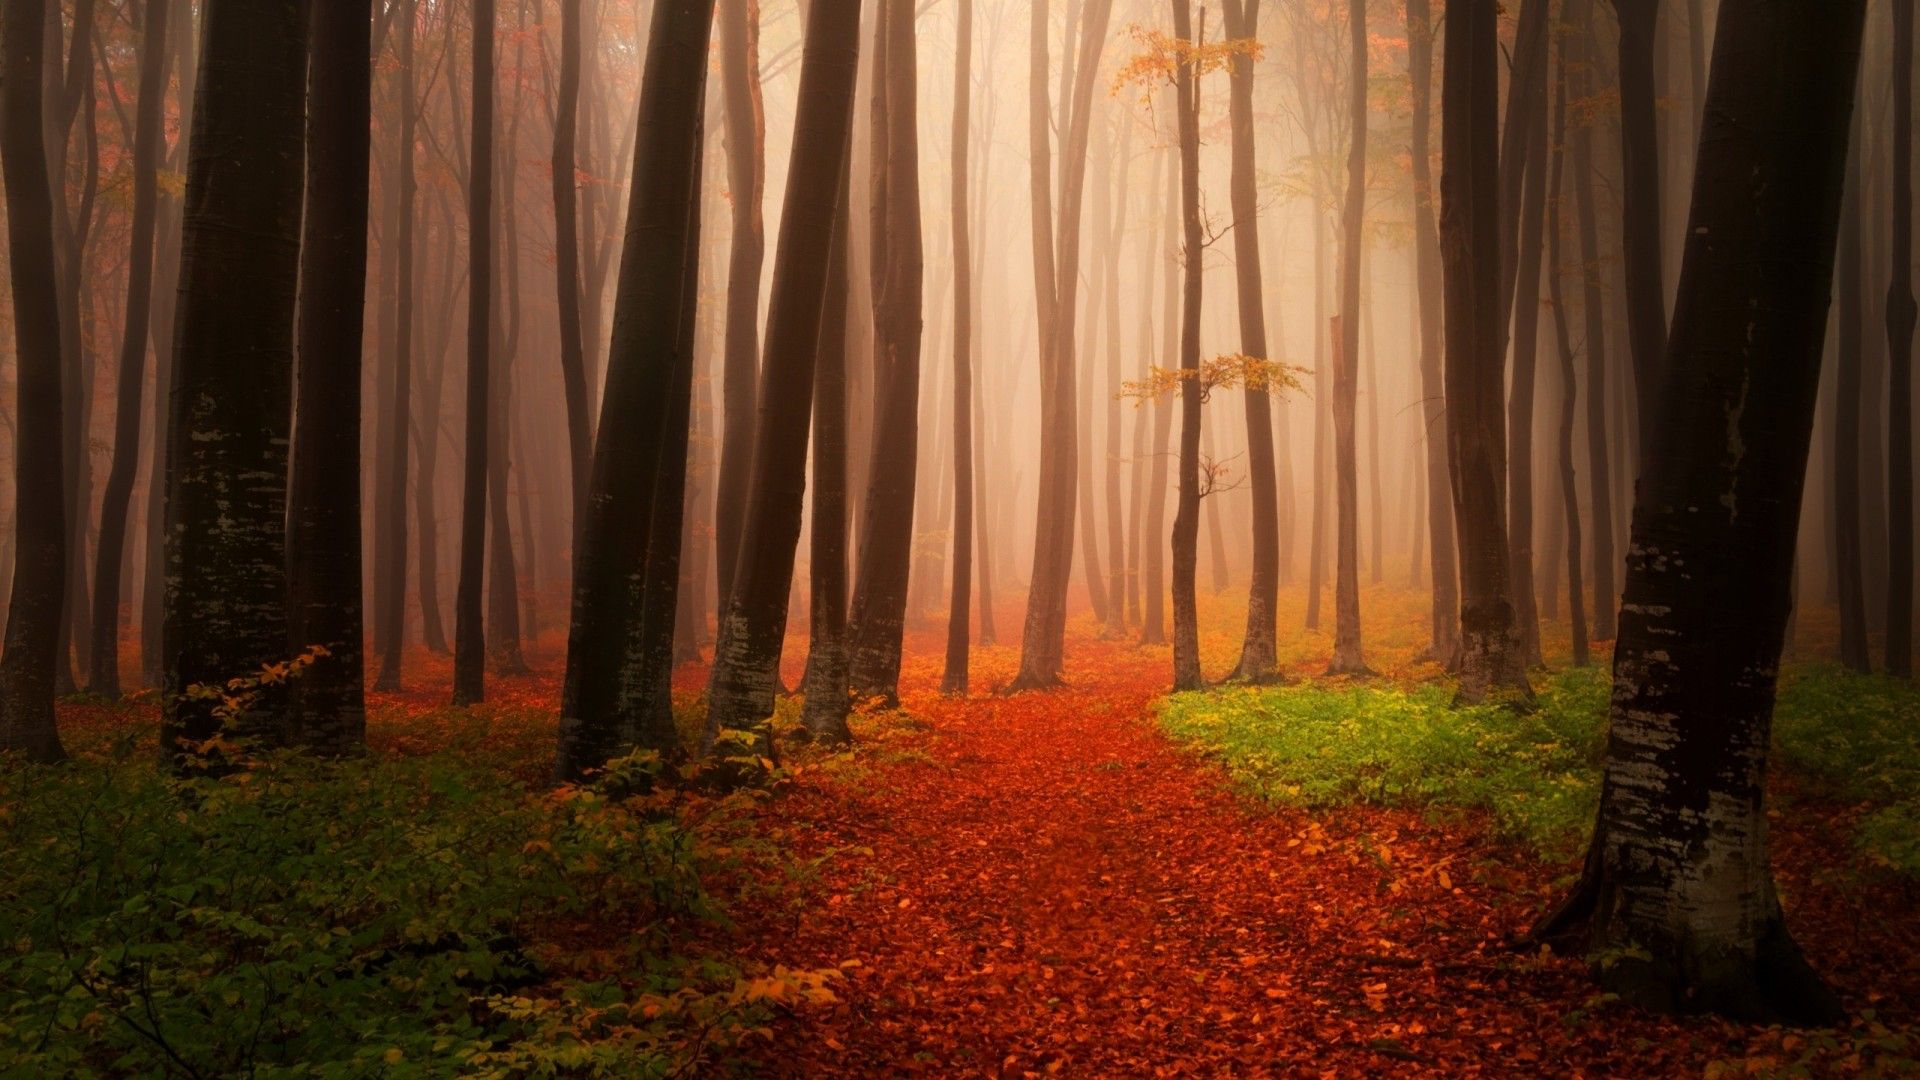 Wallpaper Autumn, Forest, Foggy, Misty, HD, Nature,. Wallpaper for iPhone, Android, Mobile and Desktop